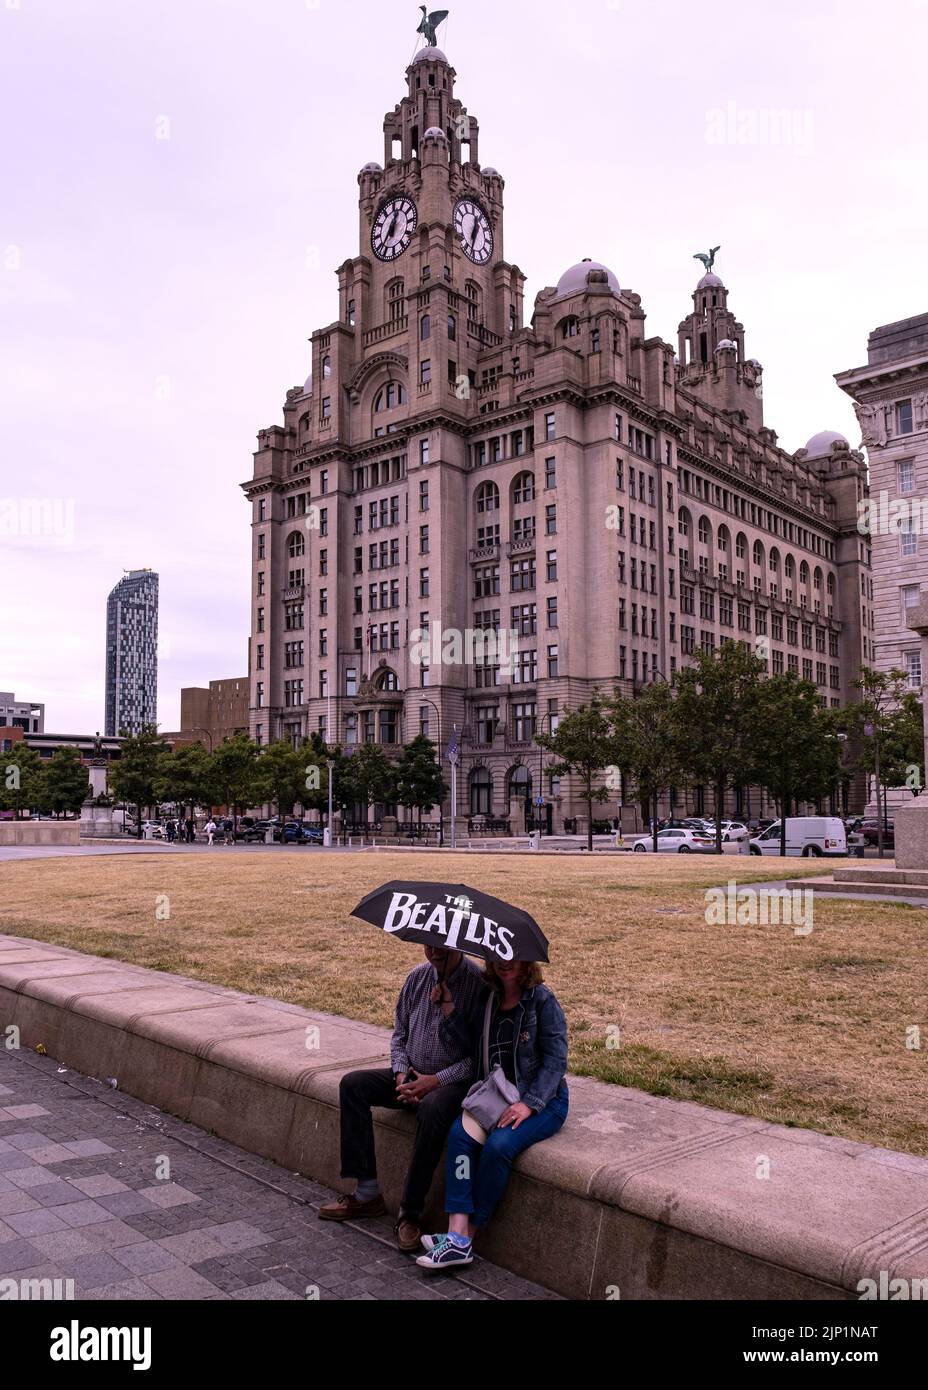 A couple sitting on a low wall with a Beatles umbrella, in front of the famous Royal Liver Building Stock Photo